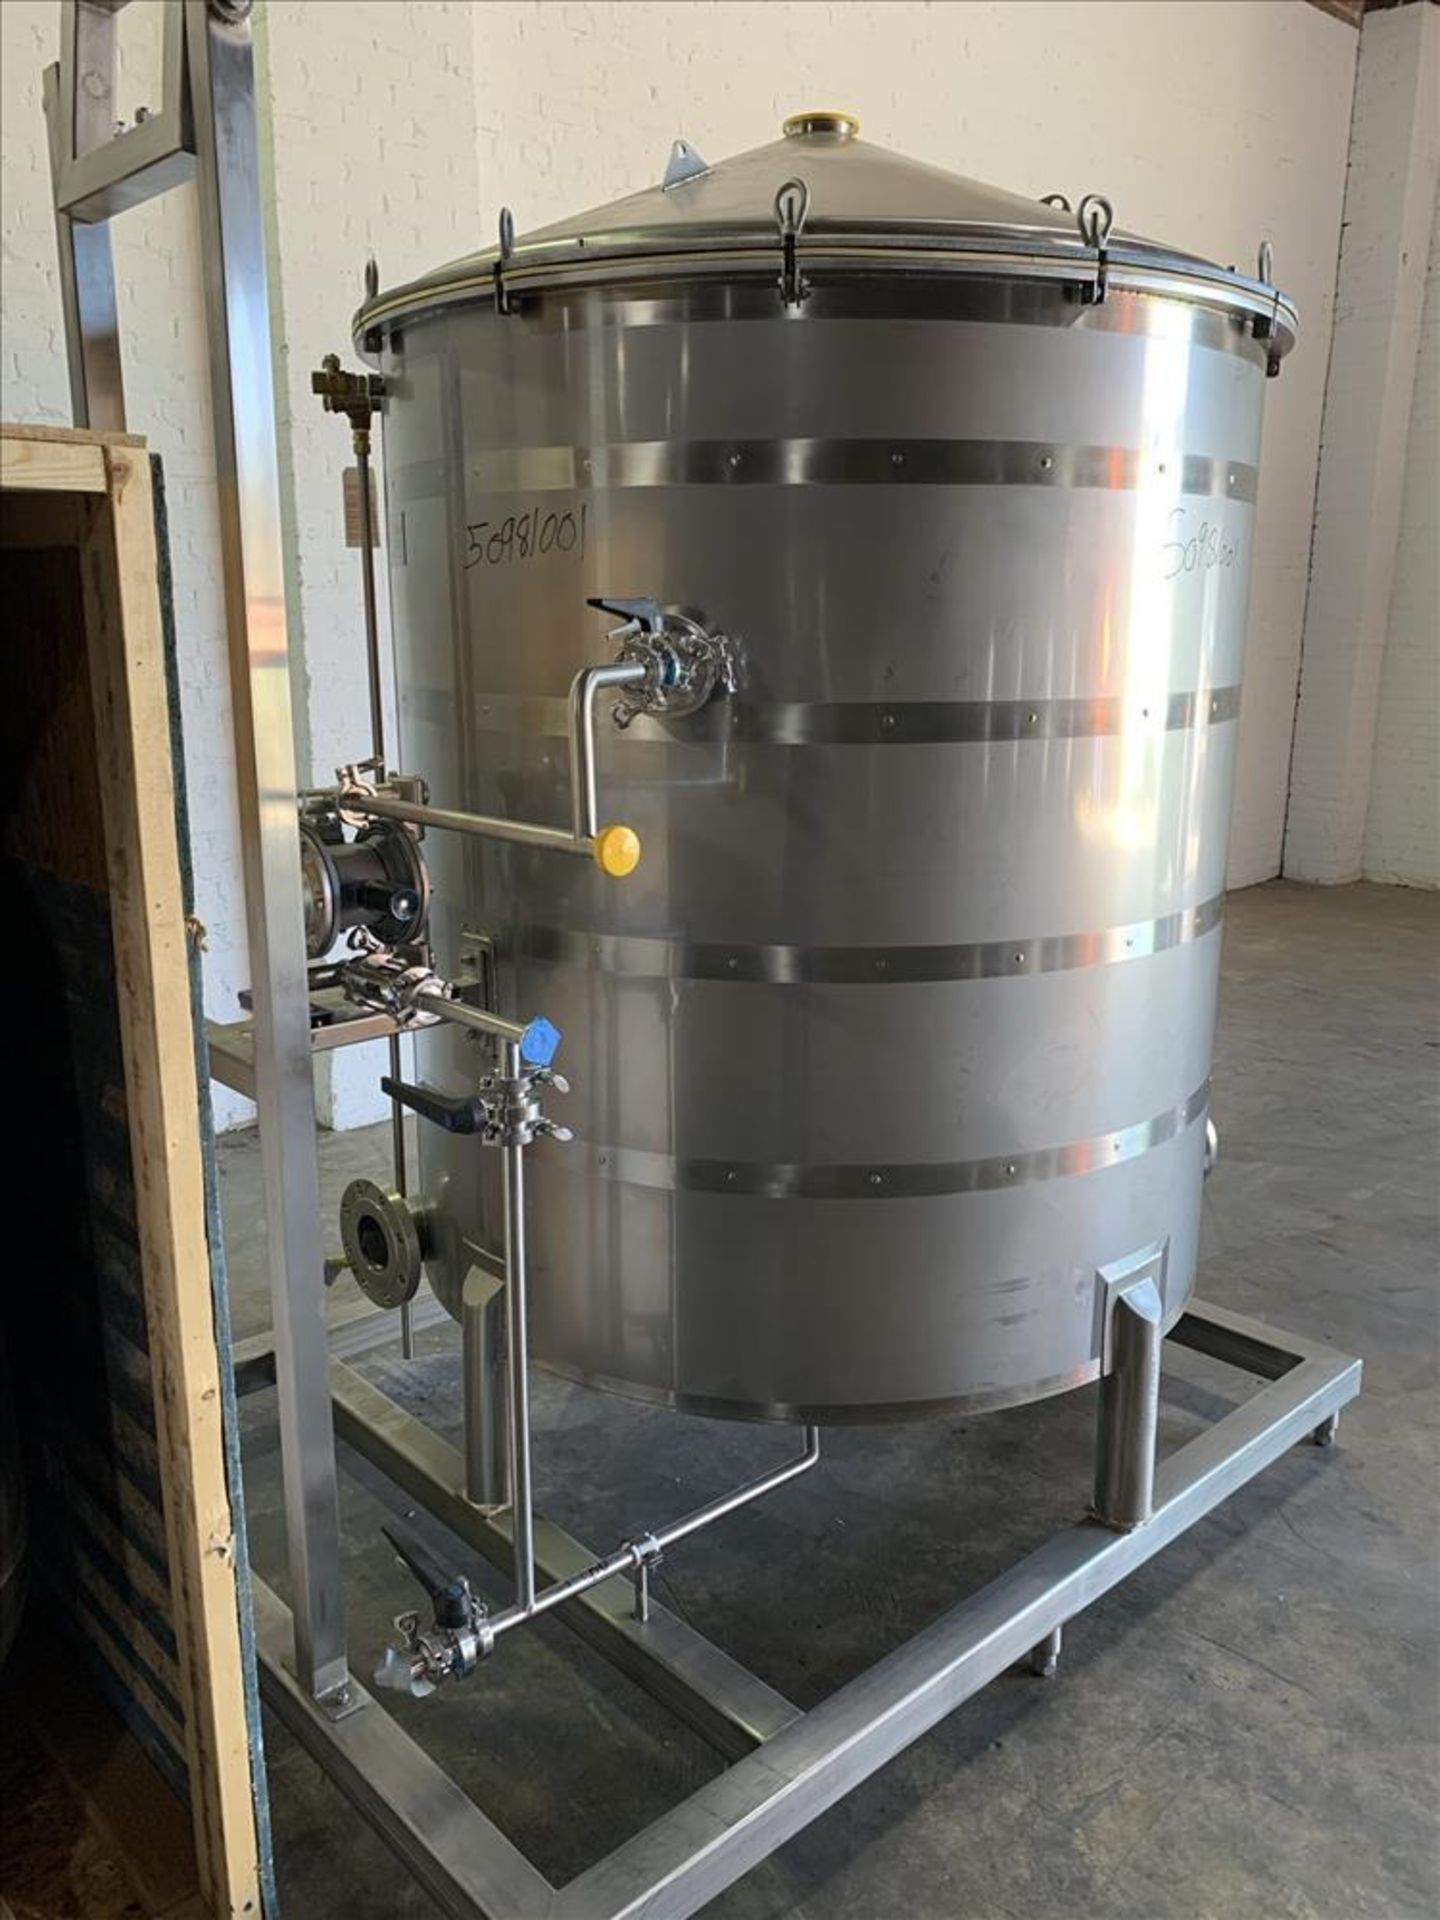 UNUSED - New In Crates - Eden Labs 3-Circuit Ethanol Platform Extraction & Solvent Recovery System - Image 20 of 152